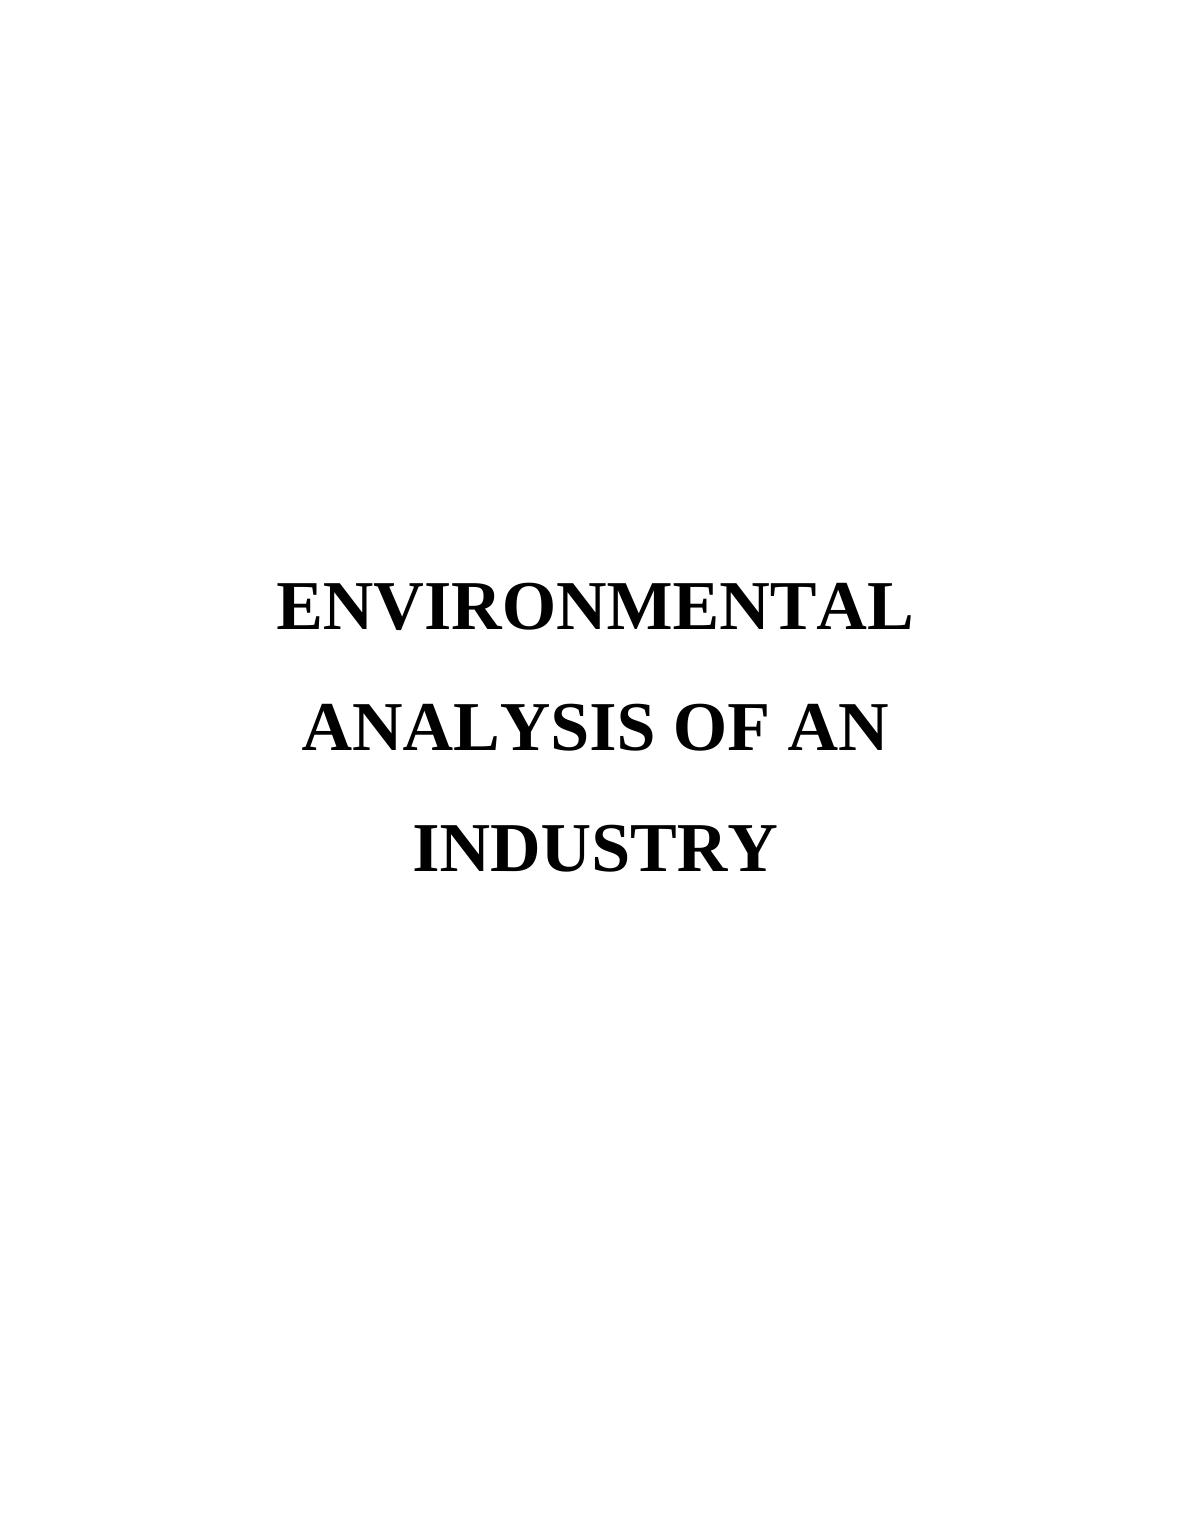 Environmental Analysis of an Industry_1